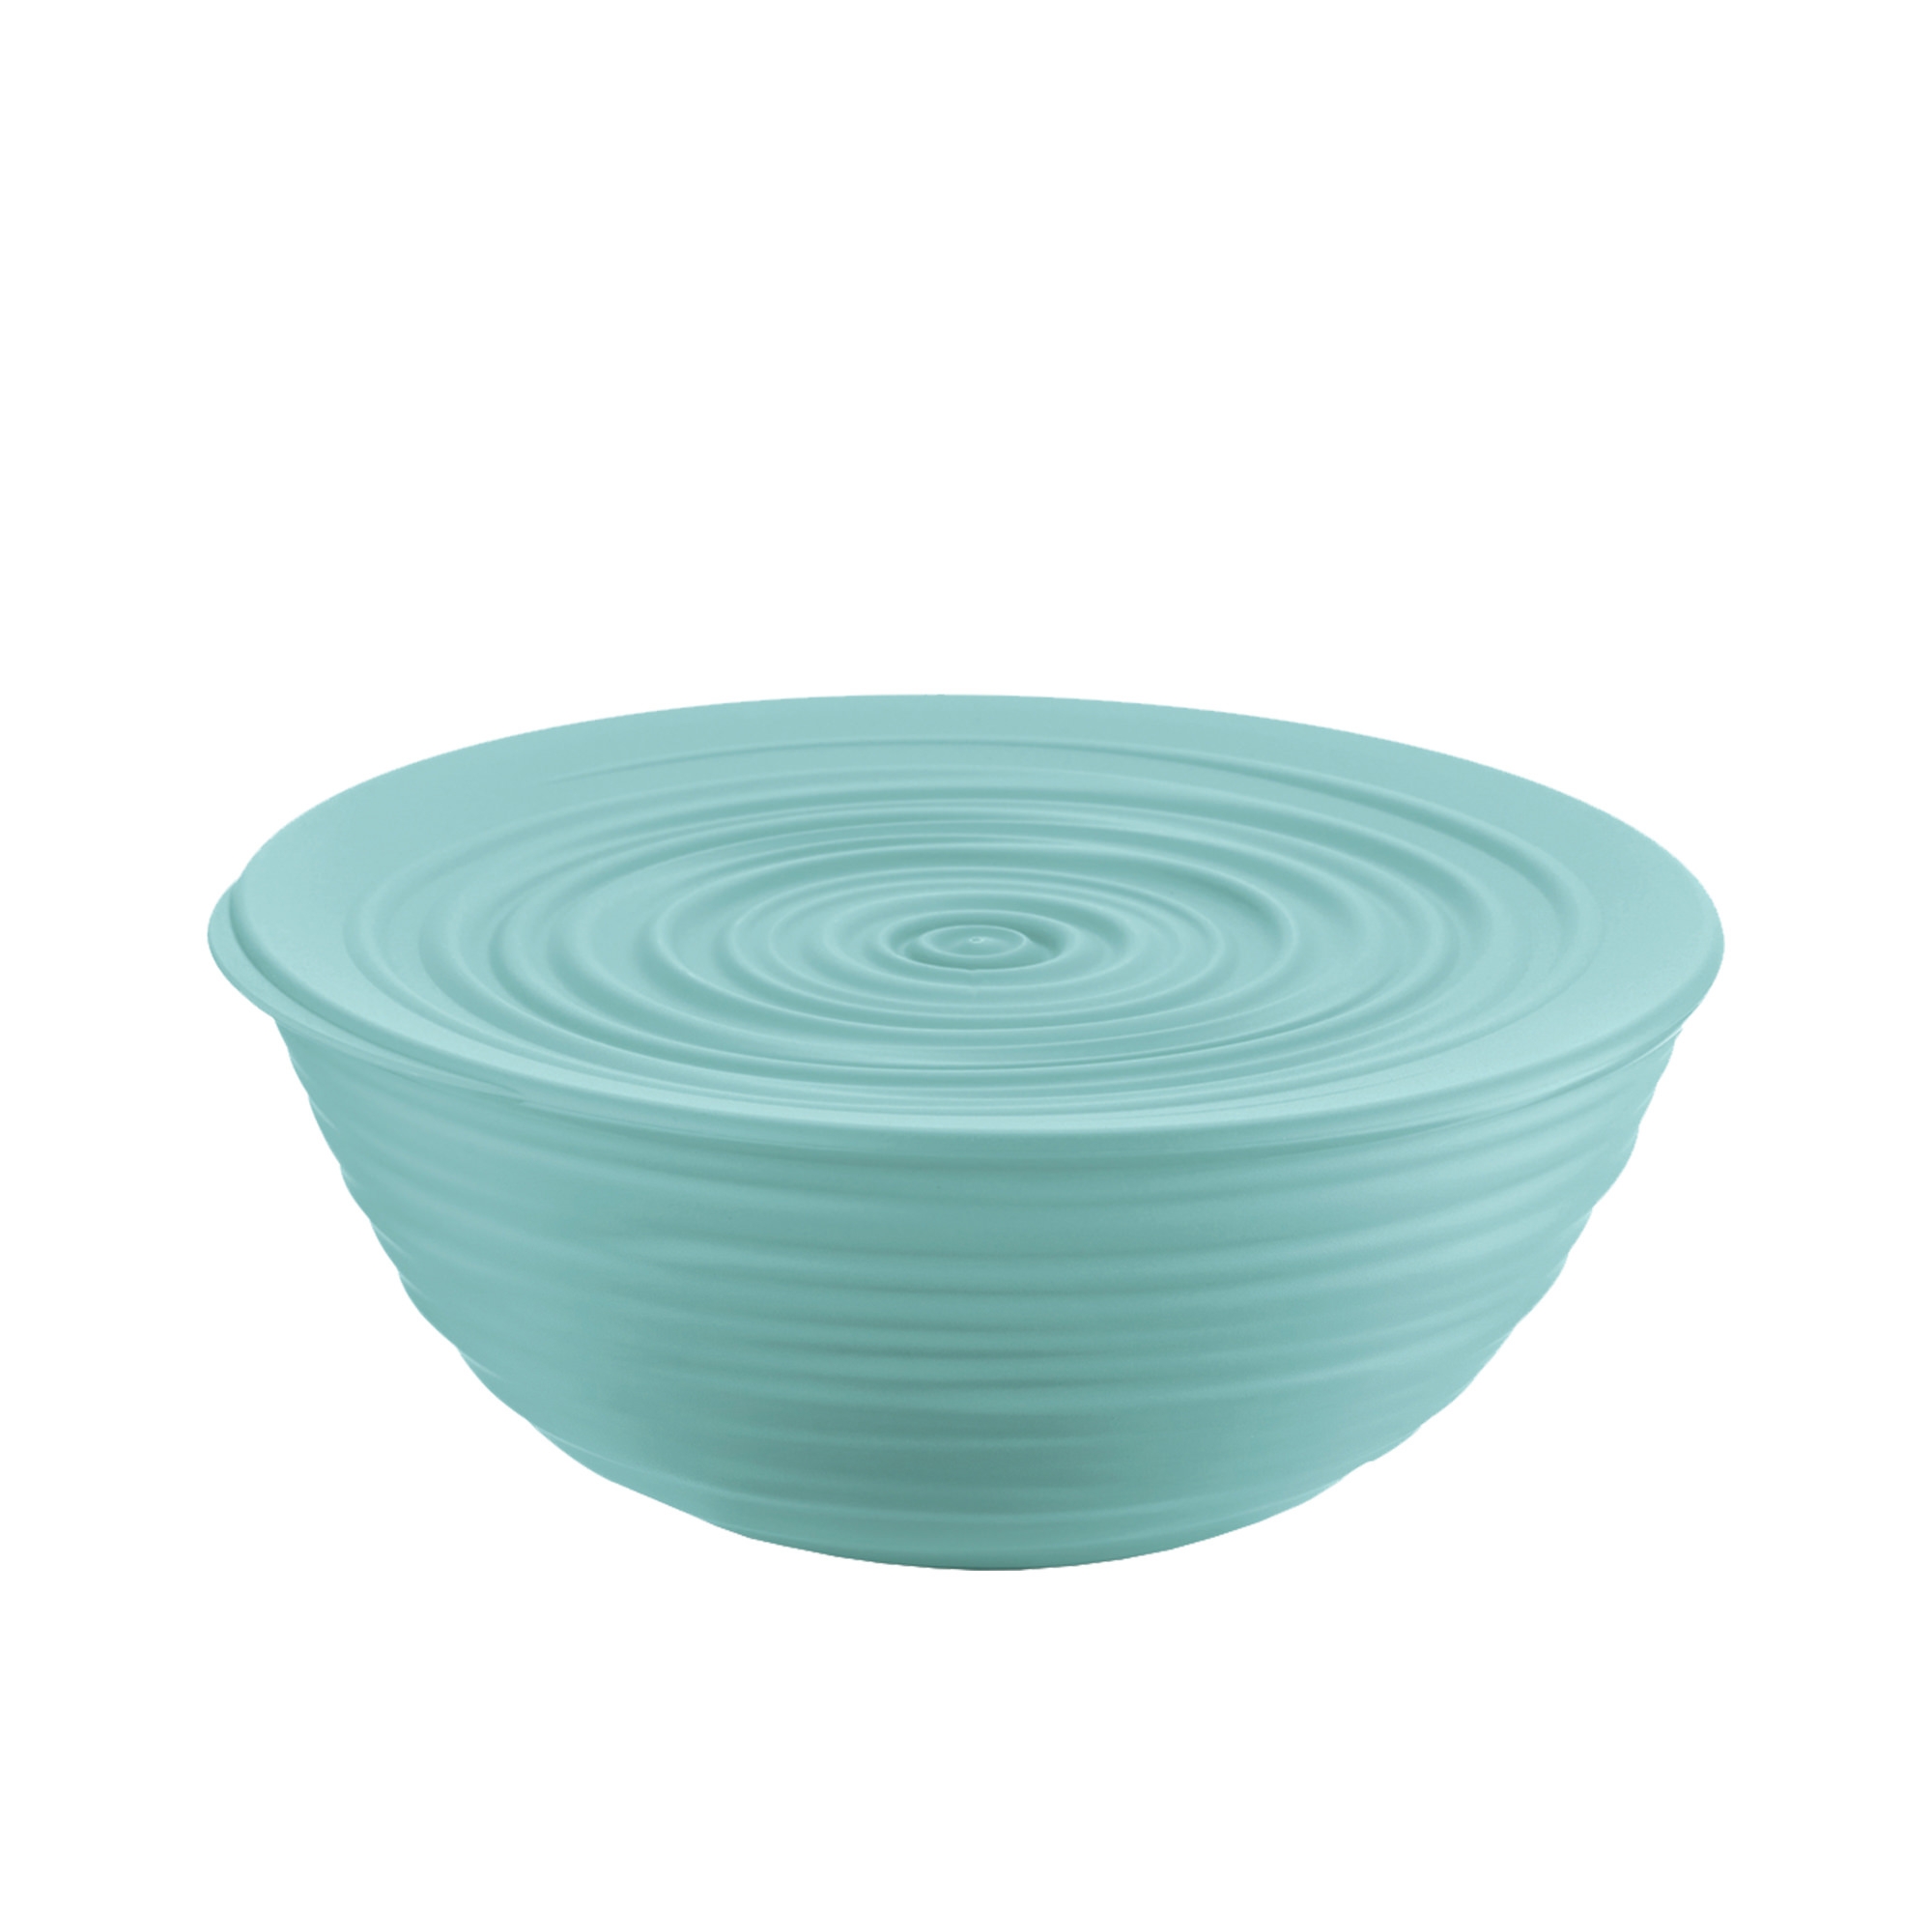 Guzzini Earth Tierra Bowl with Lid Large Sage Green Image 1